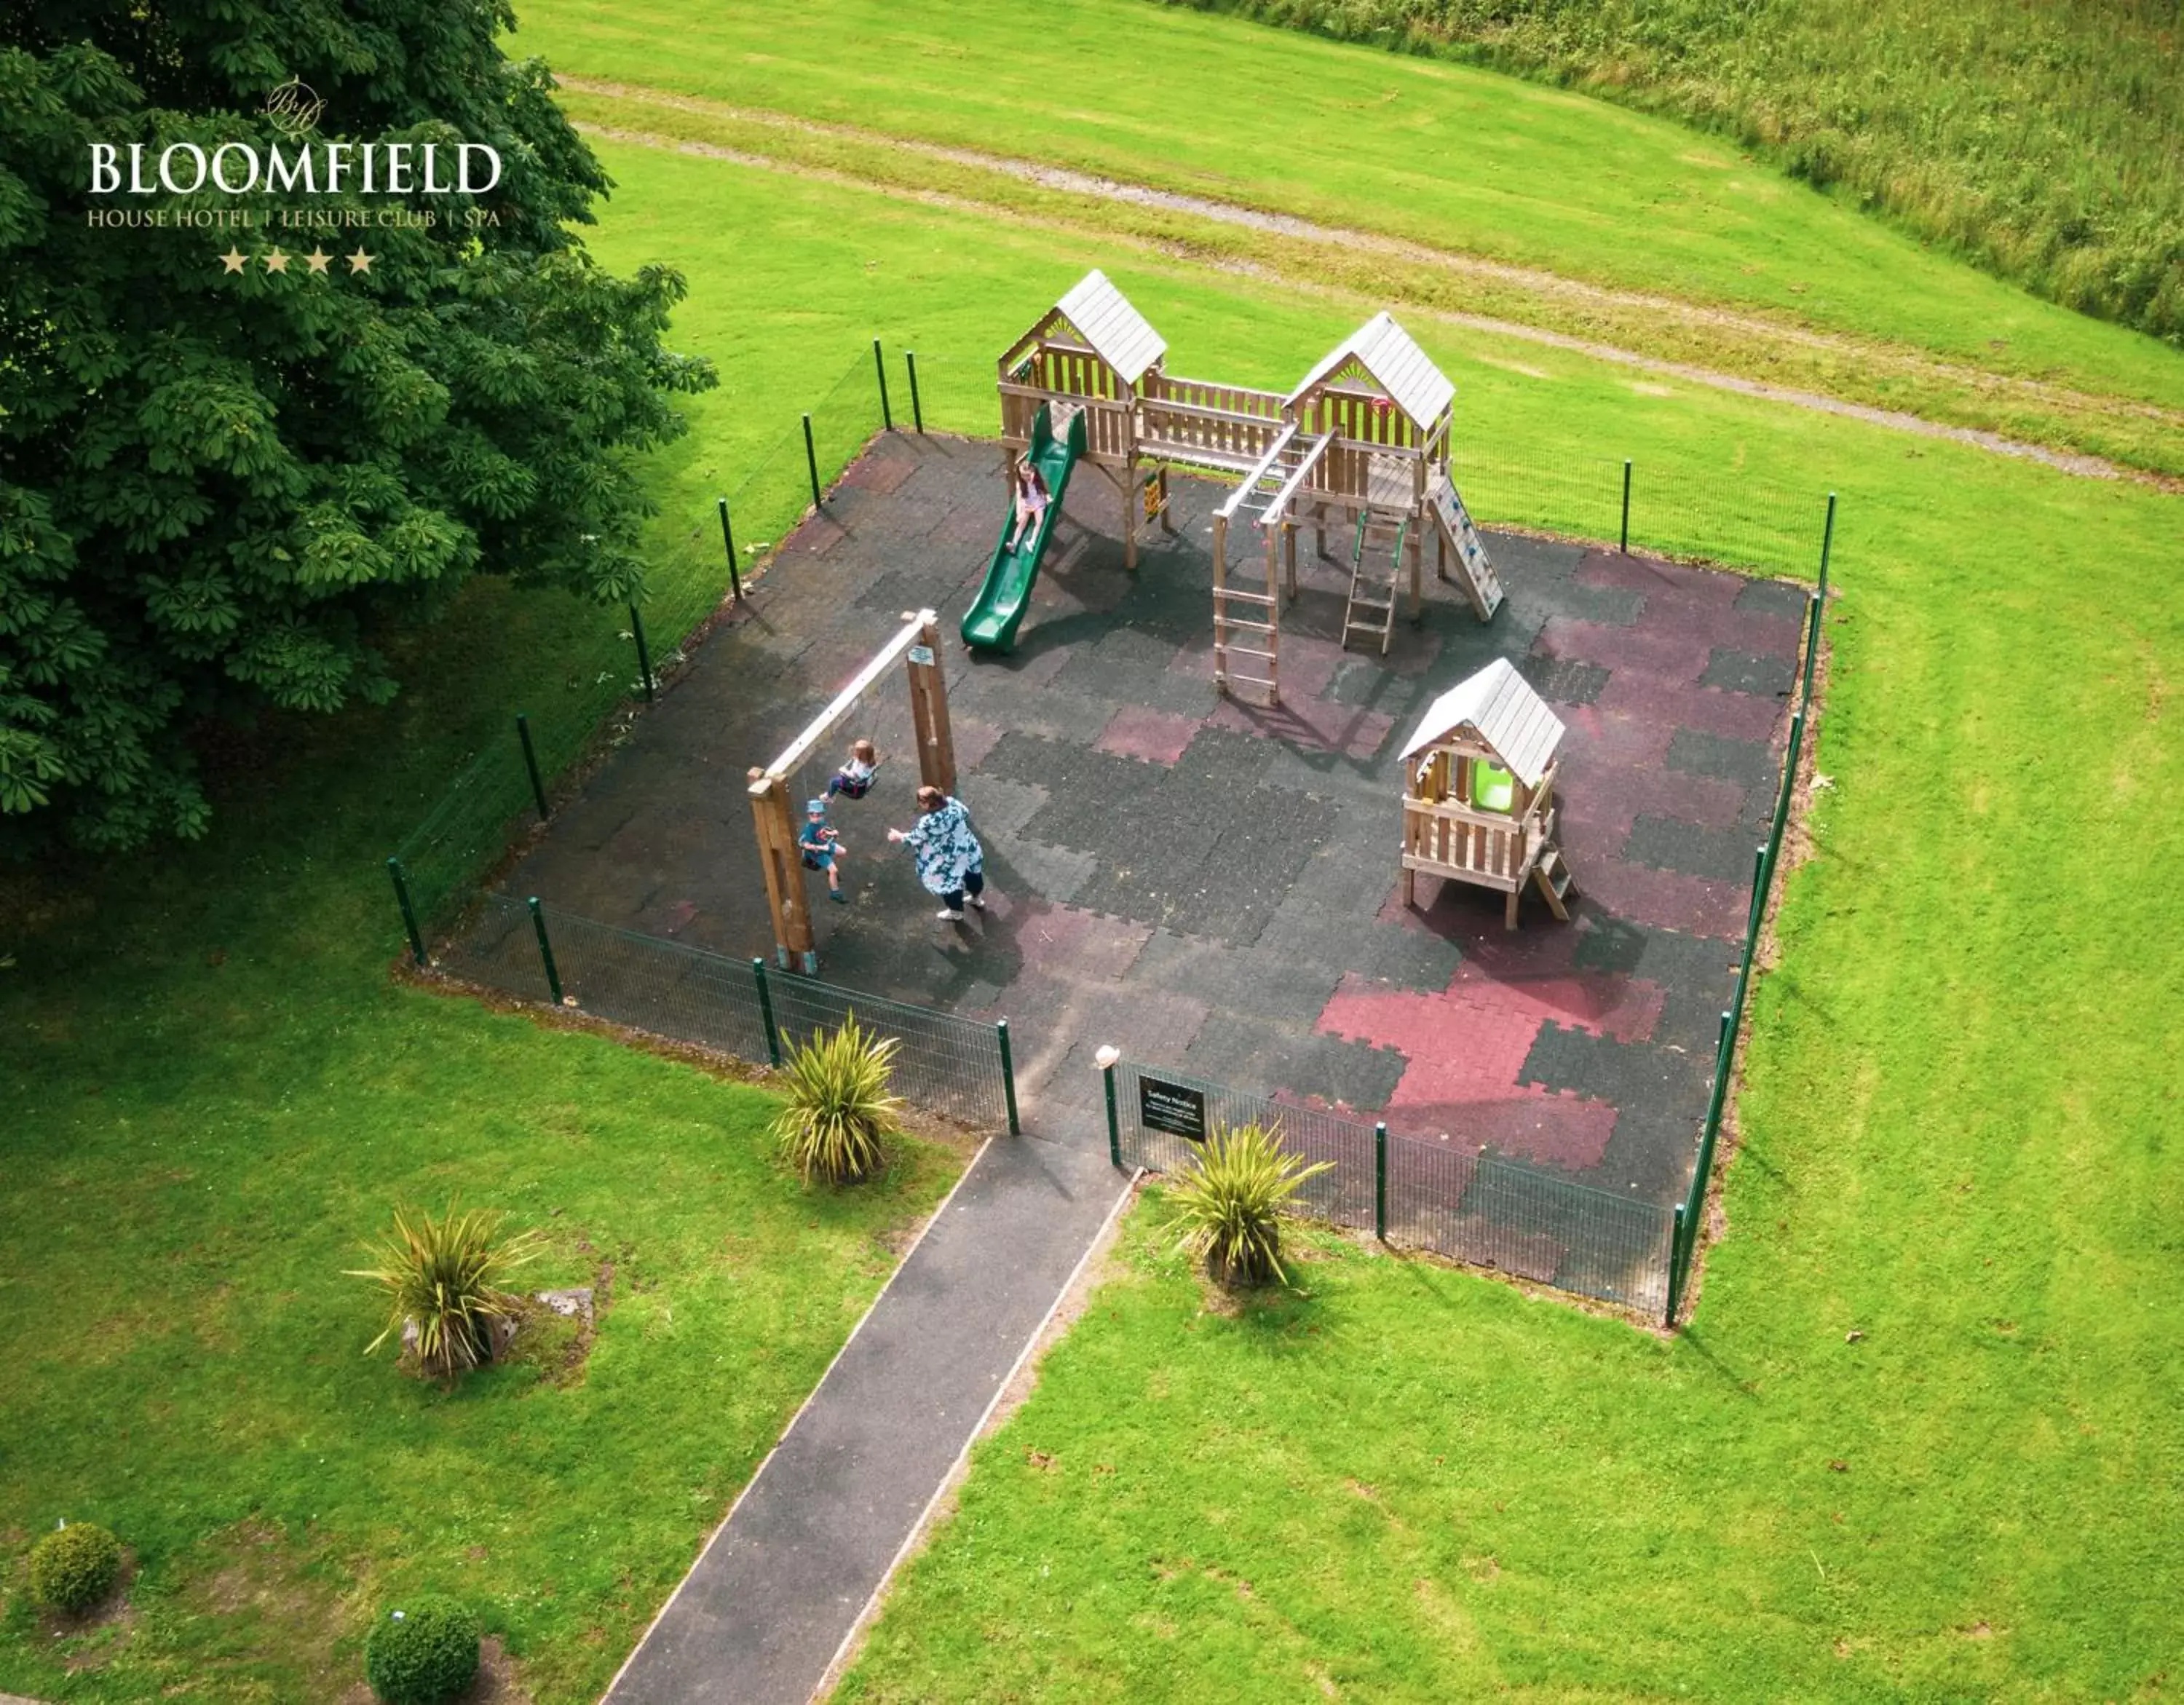 Children play ground in Bloomfield House Hotel, Leisure Club & Spa